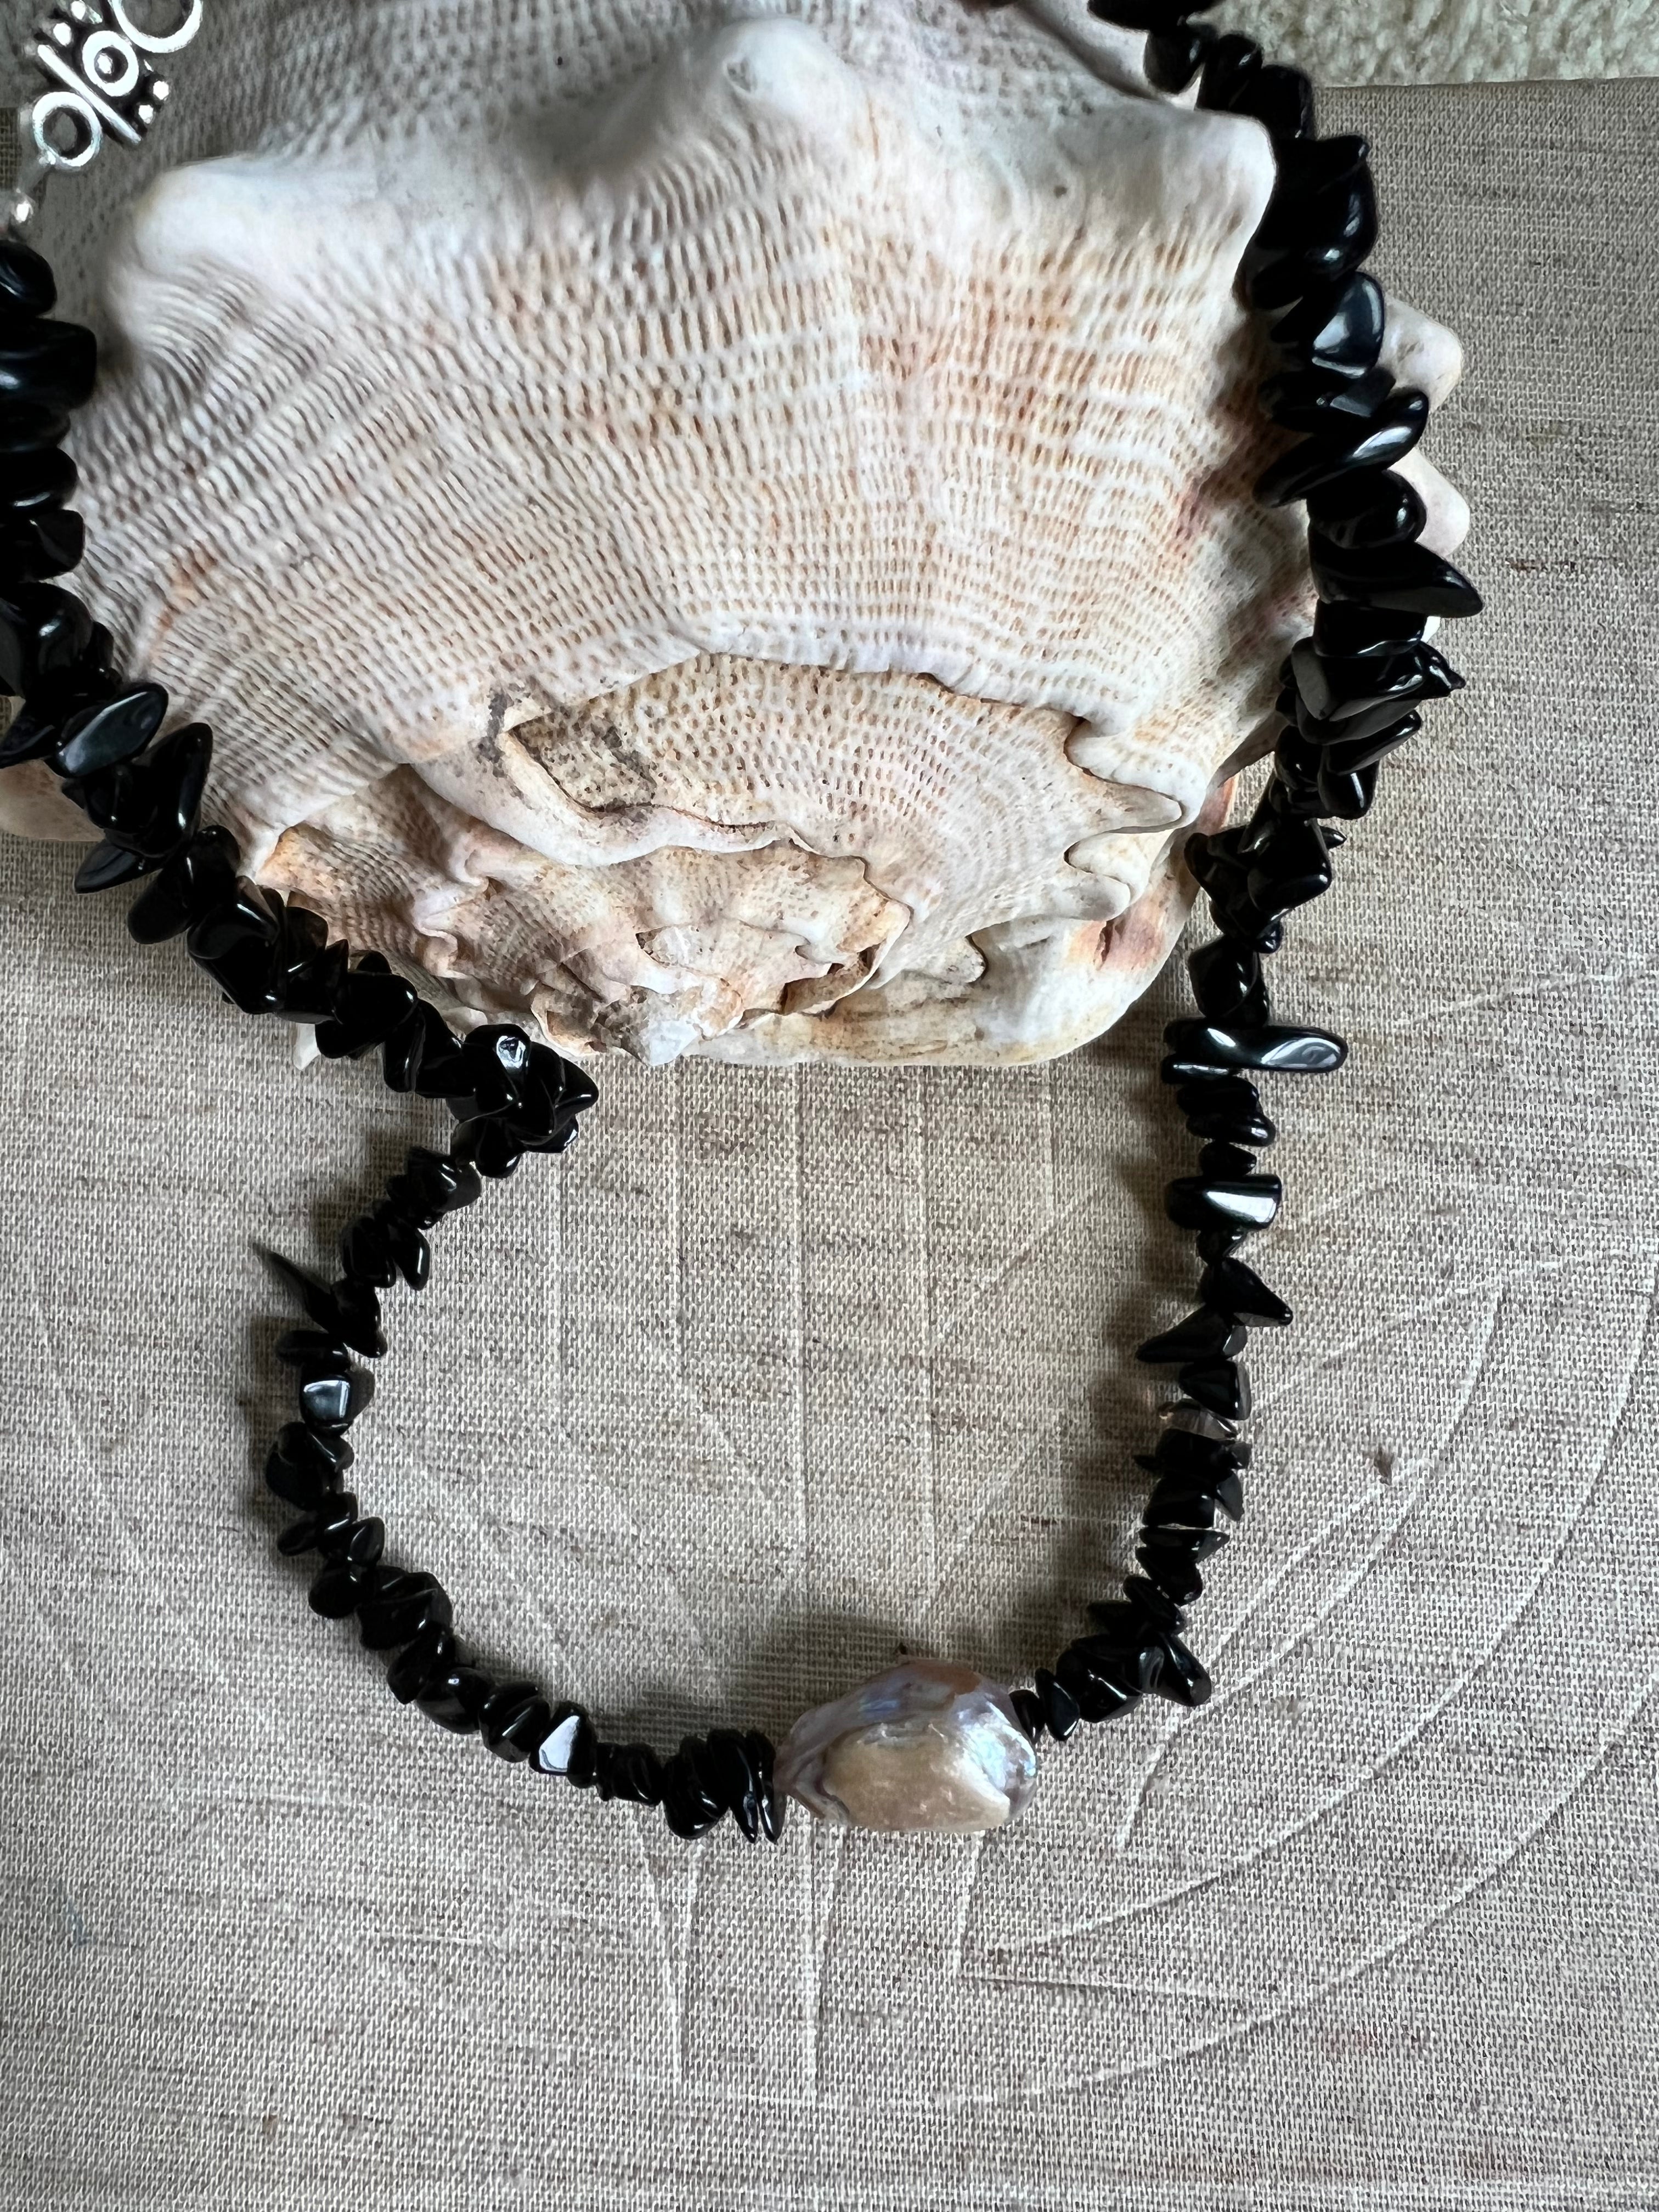 Baroque Pearl CRYSTAL Bead Necklace( Black Tourmaline) - Honorooroo Lifestyle